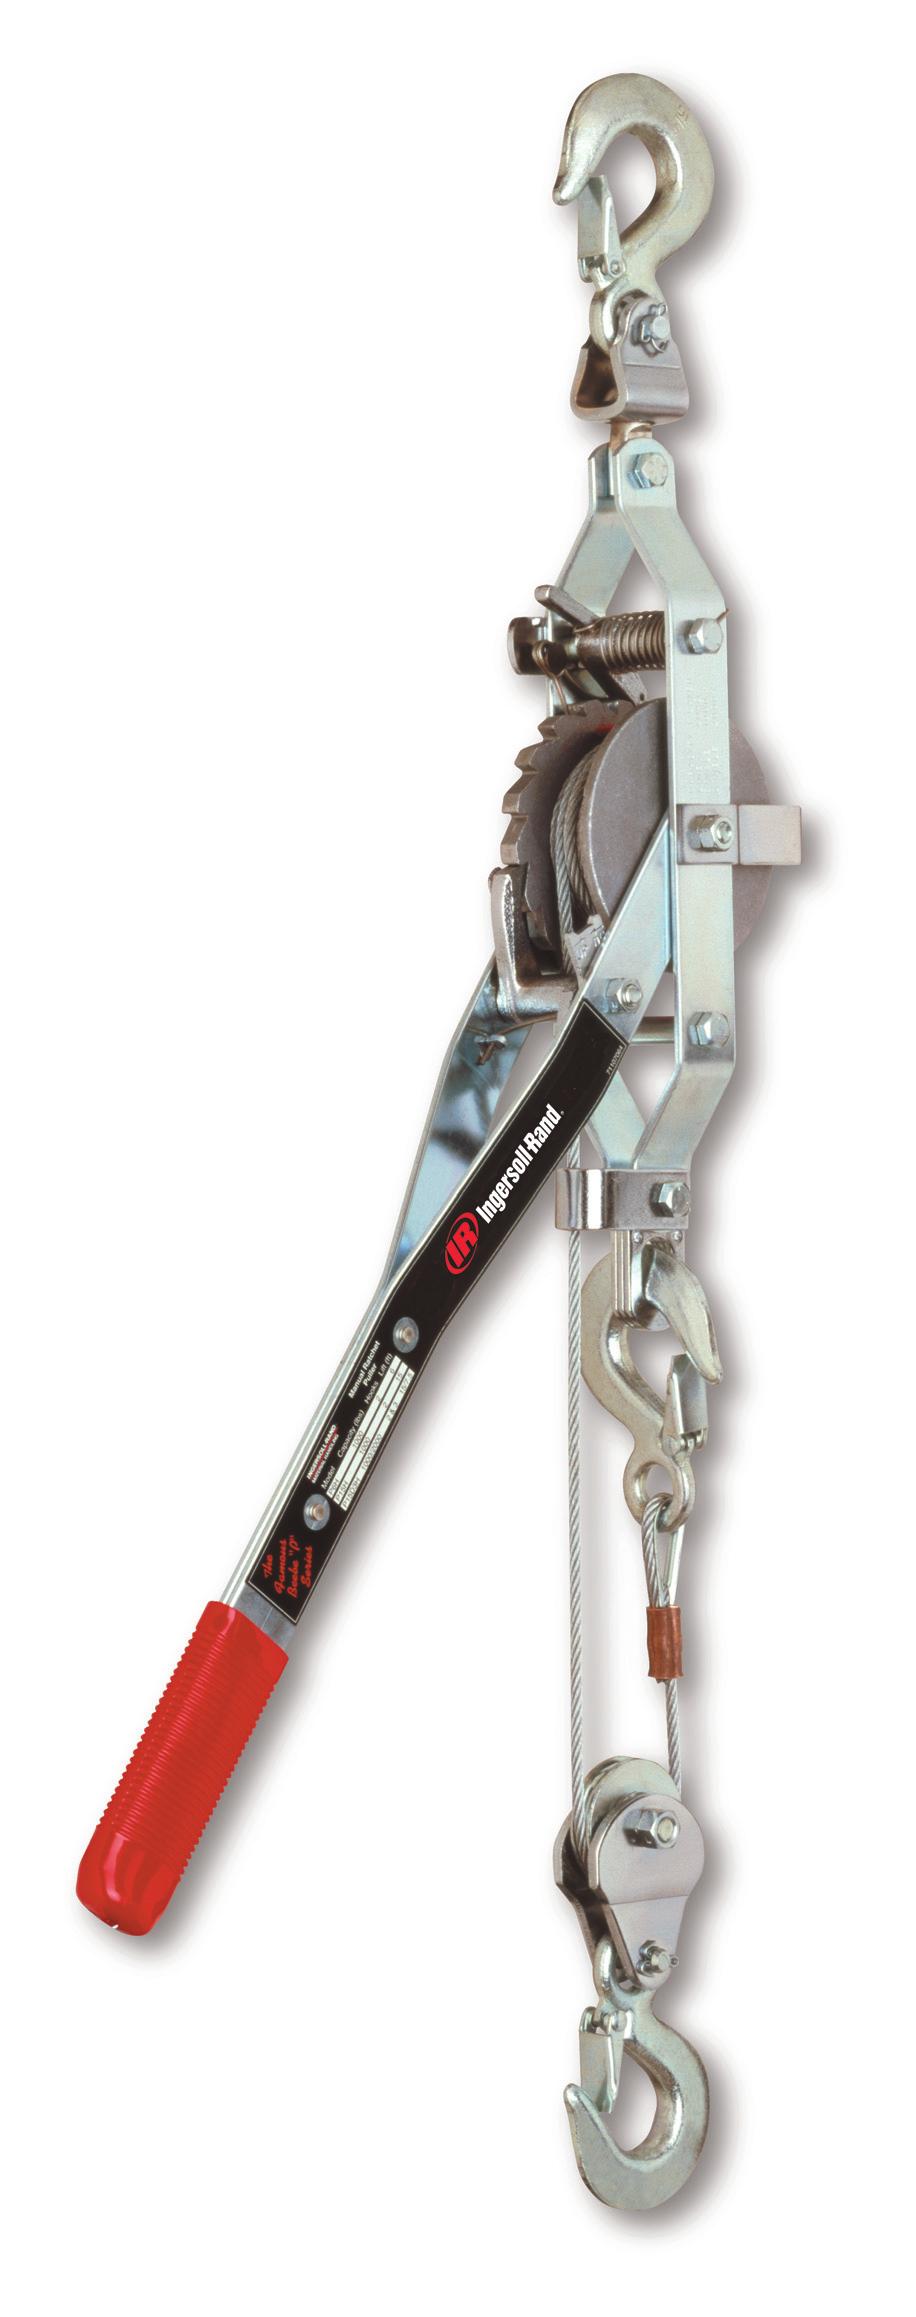 P Series Puller 1000 and 2000 lb apacity eatures / Wire Puller: 4:1 design factor. Meets SM 30.21. Handle and frame are heavy gauge steel with rivet construction and slip-resistant grip.